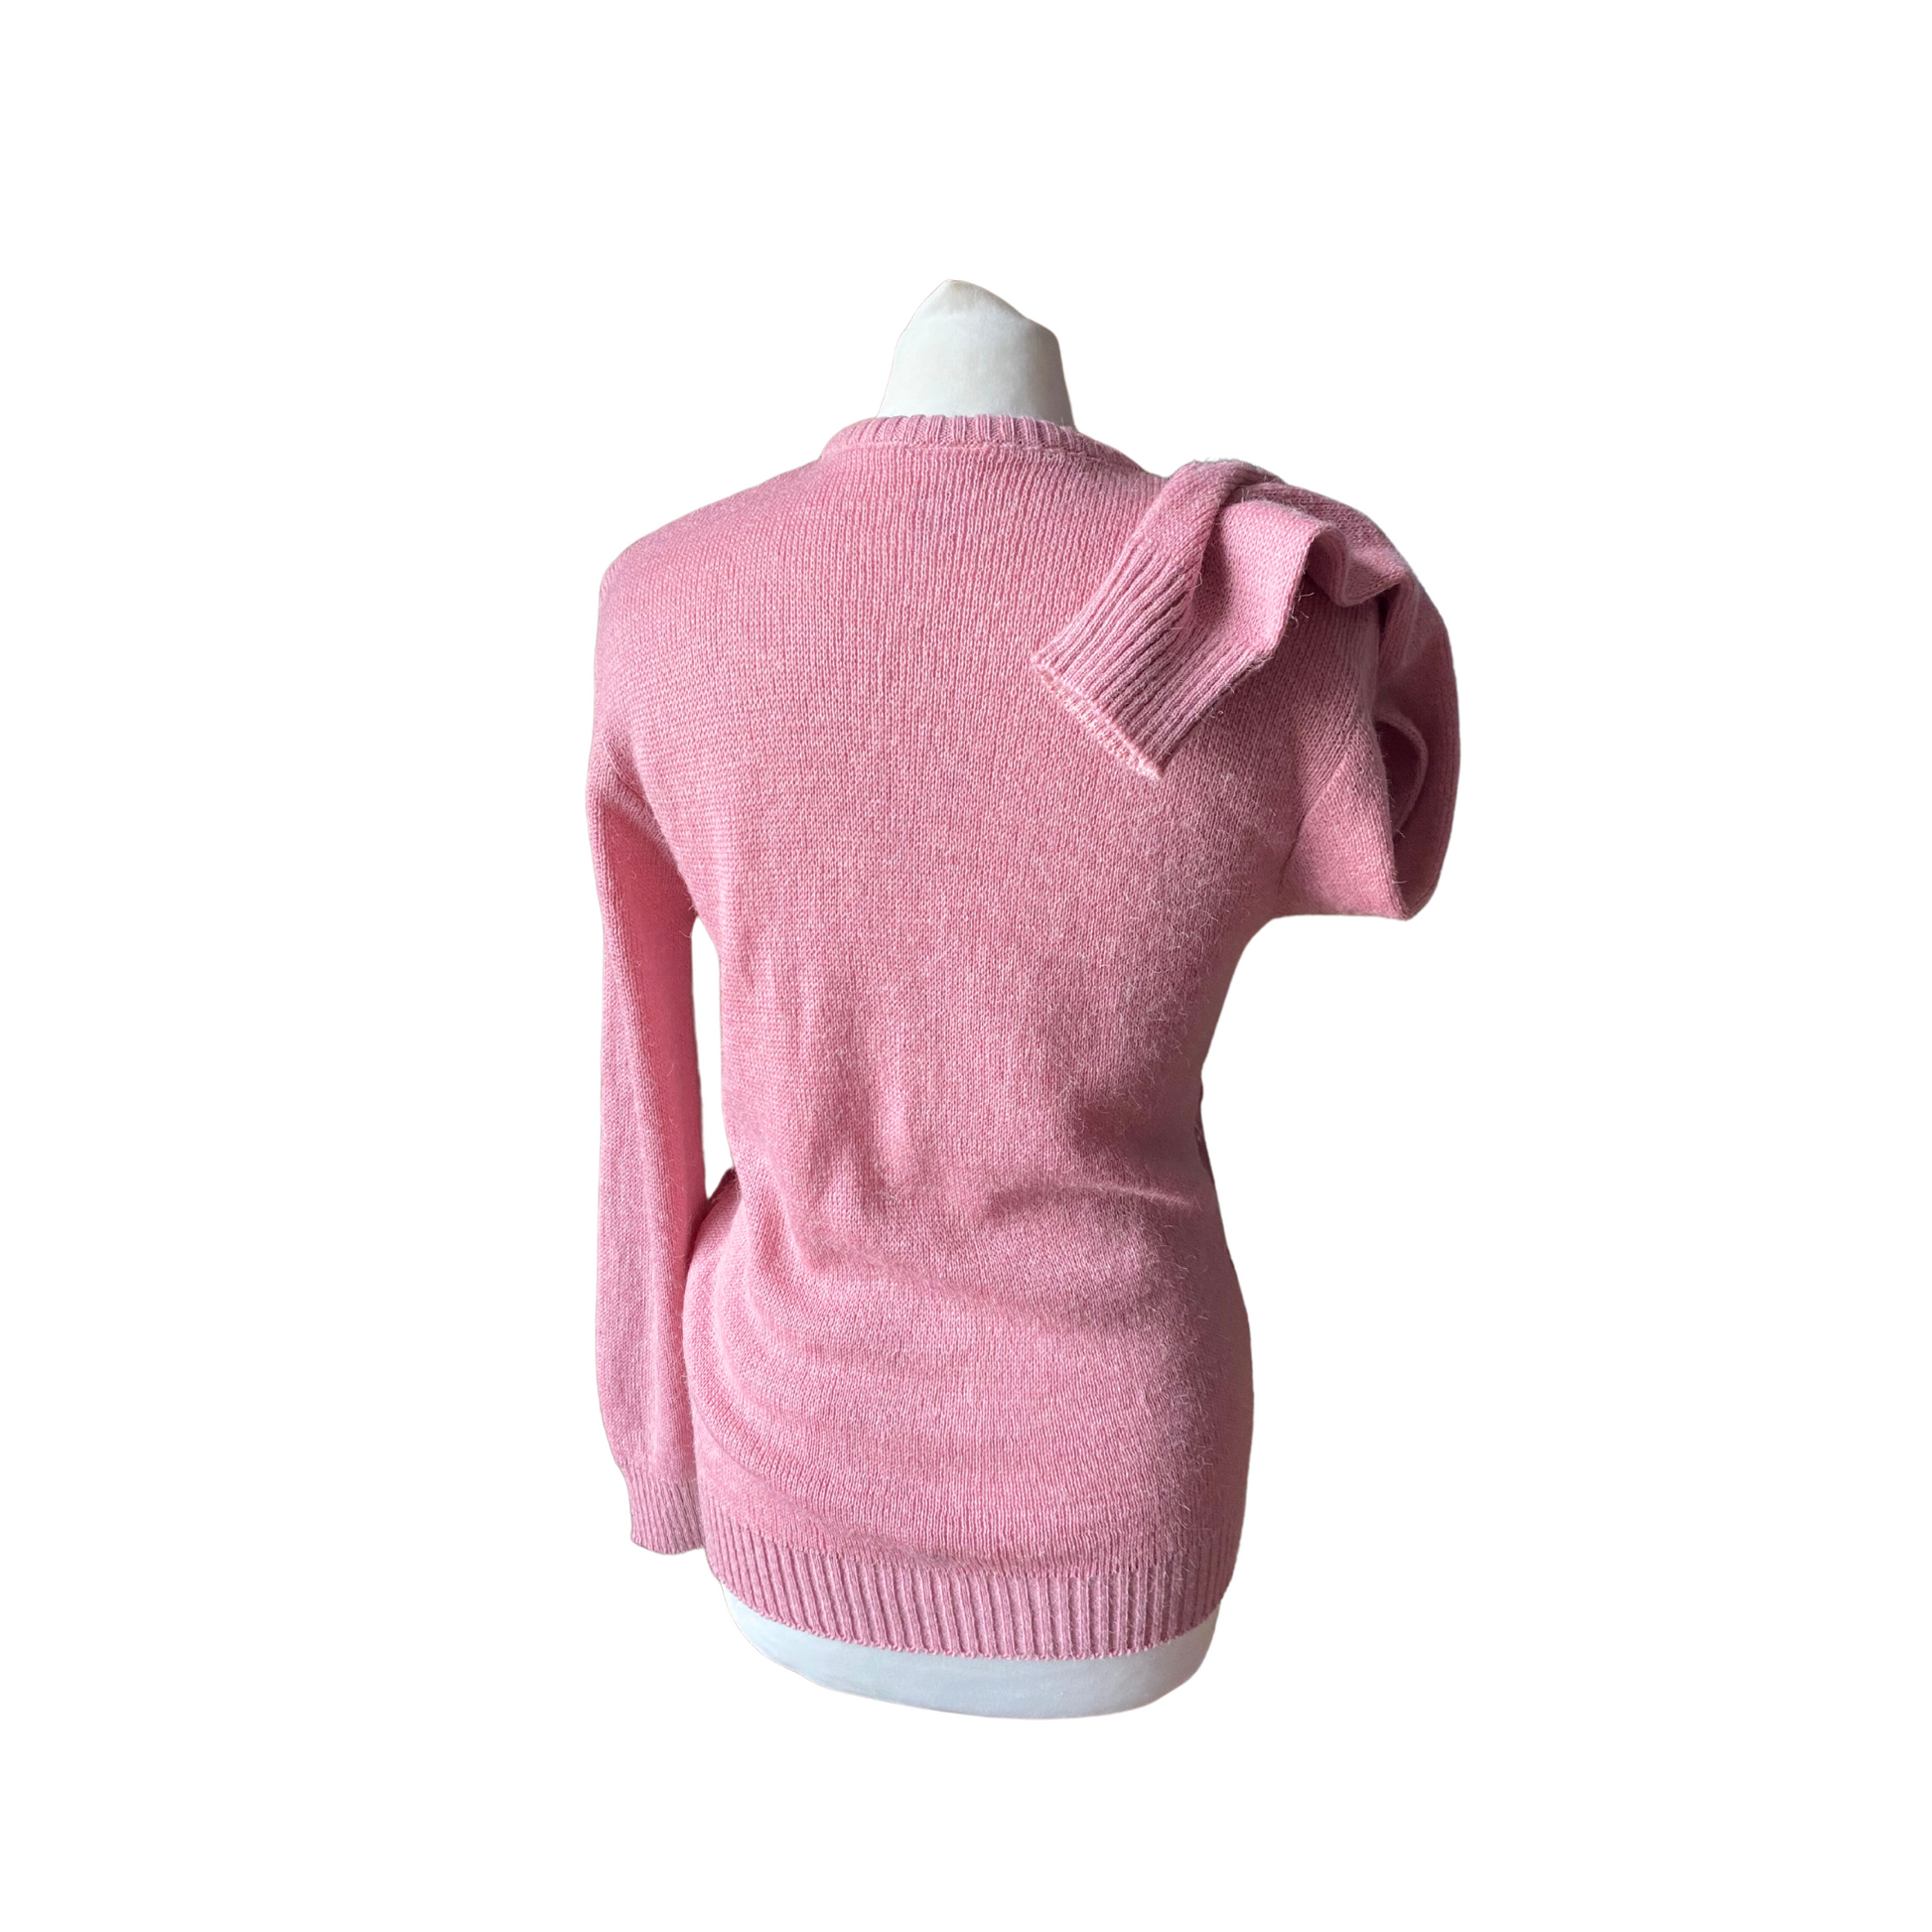 Versatile pink vintage  sweater for trousers, jeans, and skirts